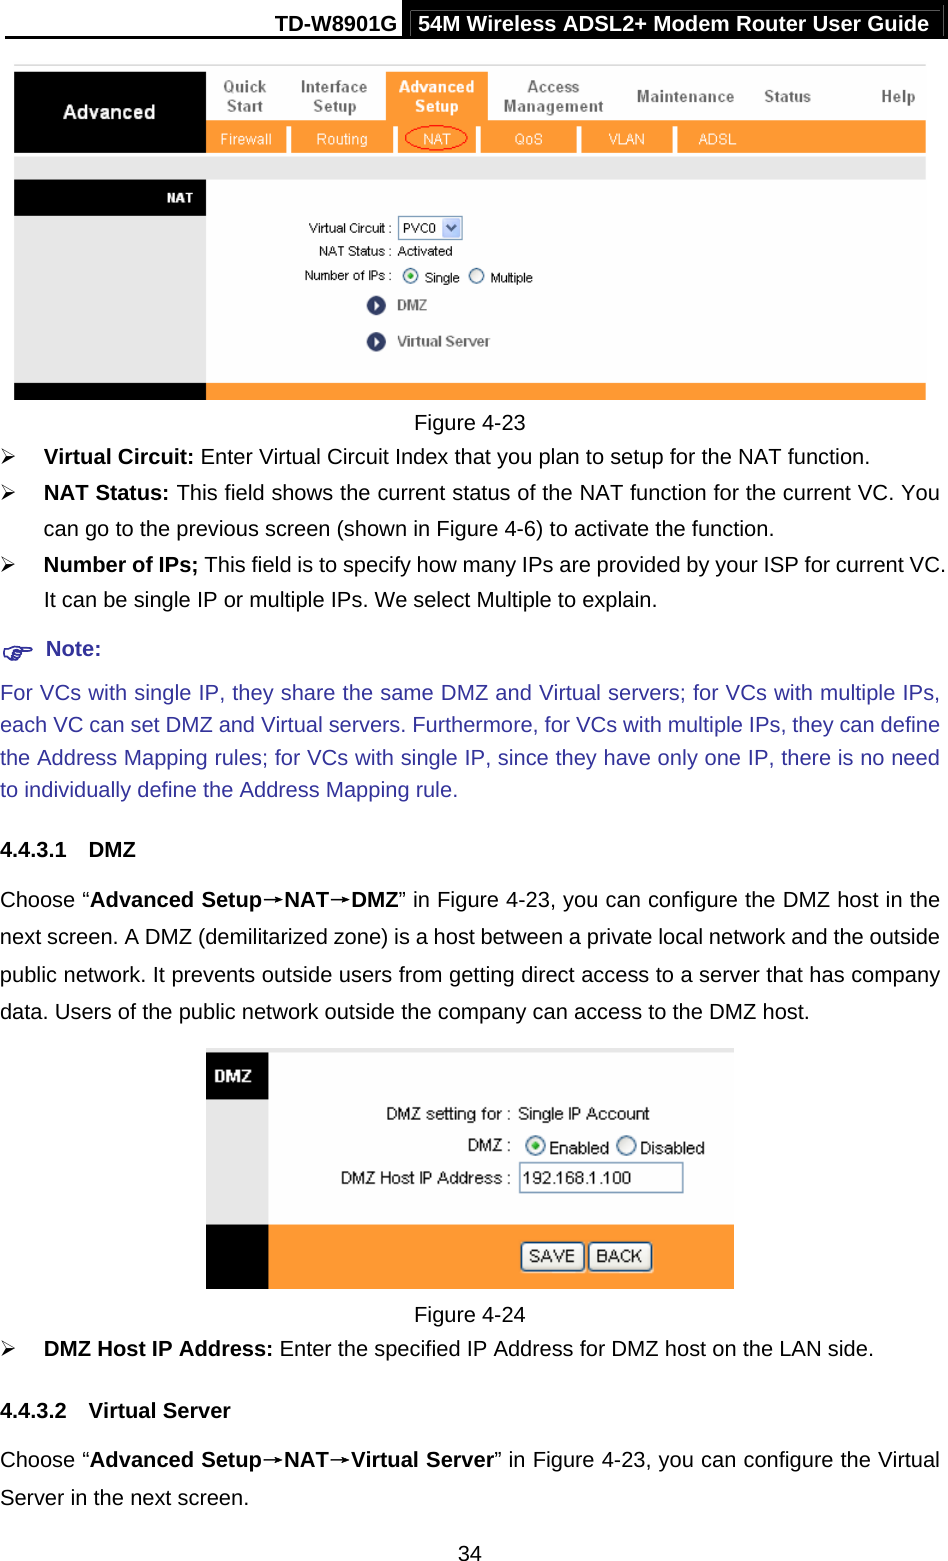 TD-W8901G 54M Wireless ADSL2+ Modem Router User Guide  34 Figure 4-23 ¾ Virtual Circuit: Enter Virtual Circuit Index that you plan to setup for the NAT function. ¾ NAT Status: This field shows the current status of the NAT function for the current VC. You can go to the previous screen (shown in Figure 4-6) to activate the function. ¾ Number of IPs; This field is to specify how many IPs are provided by your ISP for current VC. It can be single IP or multiple IPs. We select Multiple to explain. ) Note: For VCs with single IP, they share the same DMZ and Virtual servers; for VCs with multiple IPs, each VC can set DMZ and Virtual servers. Furthermore, for VCs with multiple IPs, they can define the Address Mapping rules; for VCs with single IP, since they have only one IP, there is no need to individually define the Address Mapping rule. 4.4.3.1  DMZ Choose “Advanced Setup→NAT→DMZ” in Figure 4-23, you can configure the DMZ host in the next screen. A DMZ (demilitarized zone) is a host between a private local network and the outside public network. It prevents outside users from getting direct access to a server that has company data. Users of the public network outside the company can access to the DMZ host.  Figure 4-24 ¾ DMZ Host IP Address: Enter the specified IP Address for DMZ host on the LAN side. 4.4.3.2  Virtual Server Choose “Advanced Setup→NAT→Virtual Server” in Figure 4-23, you can configure the Virtual Server in the next screen.   